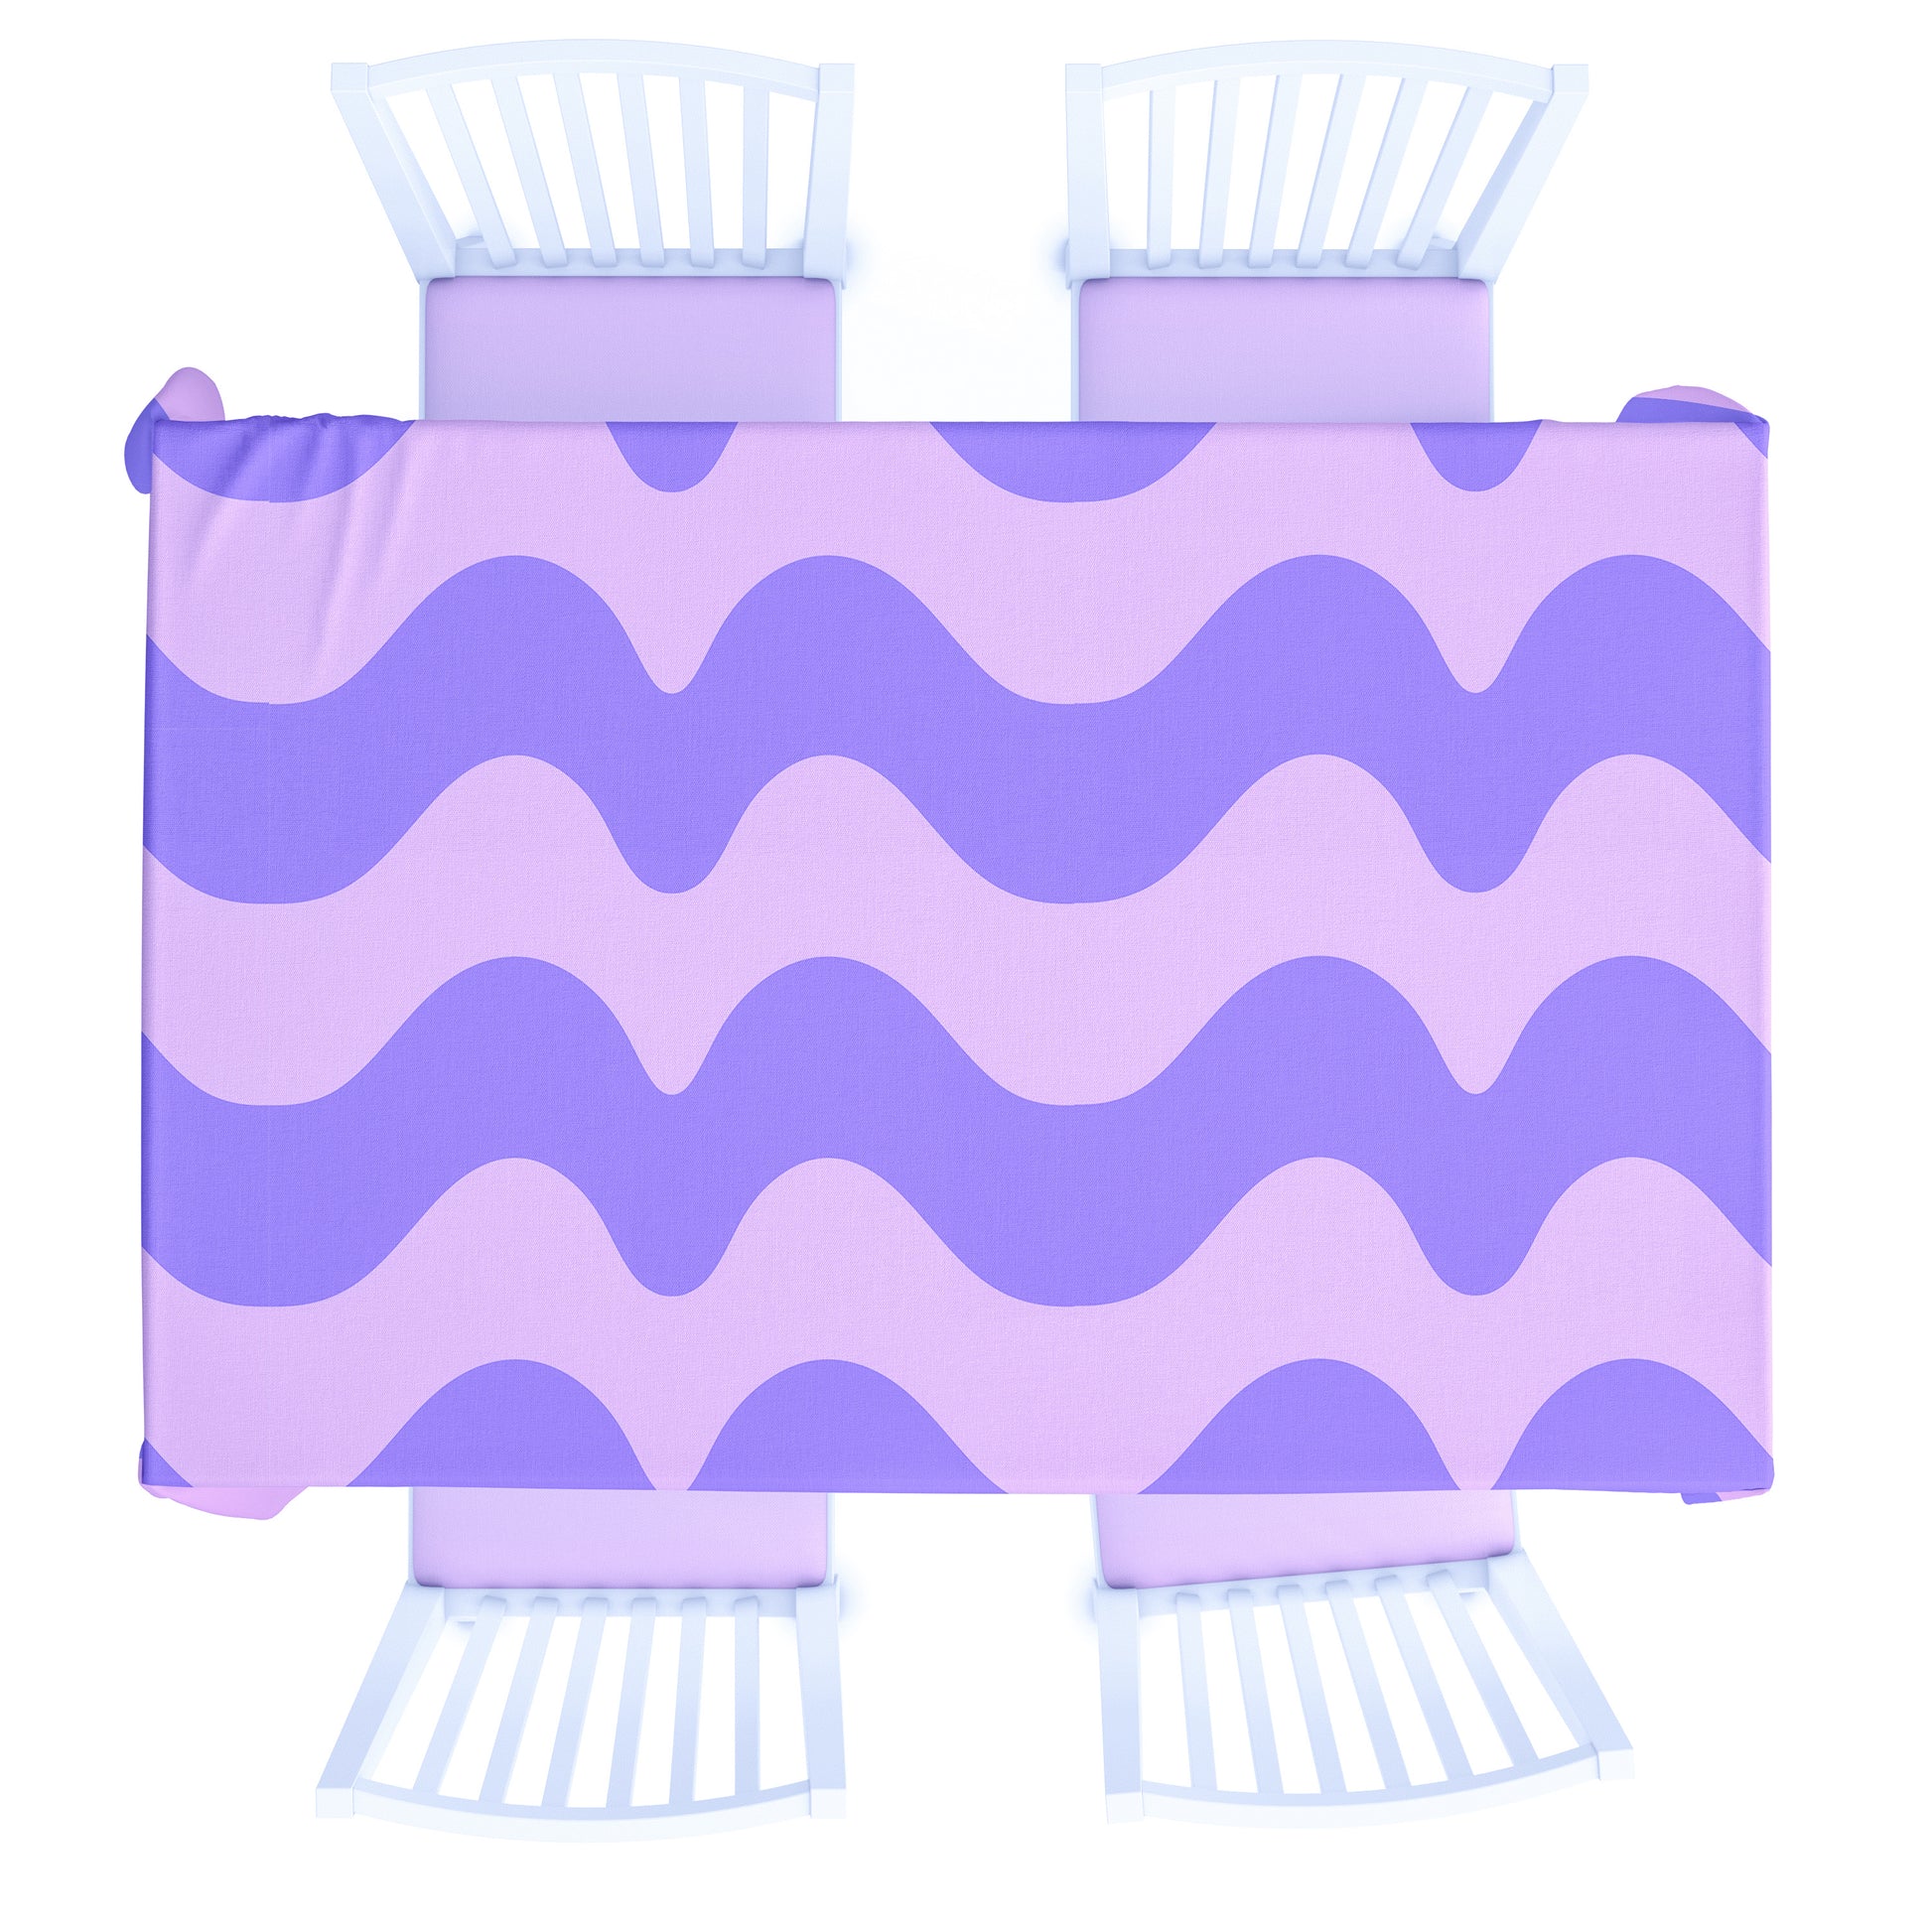 Wavy tablecloth in pink and purple 